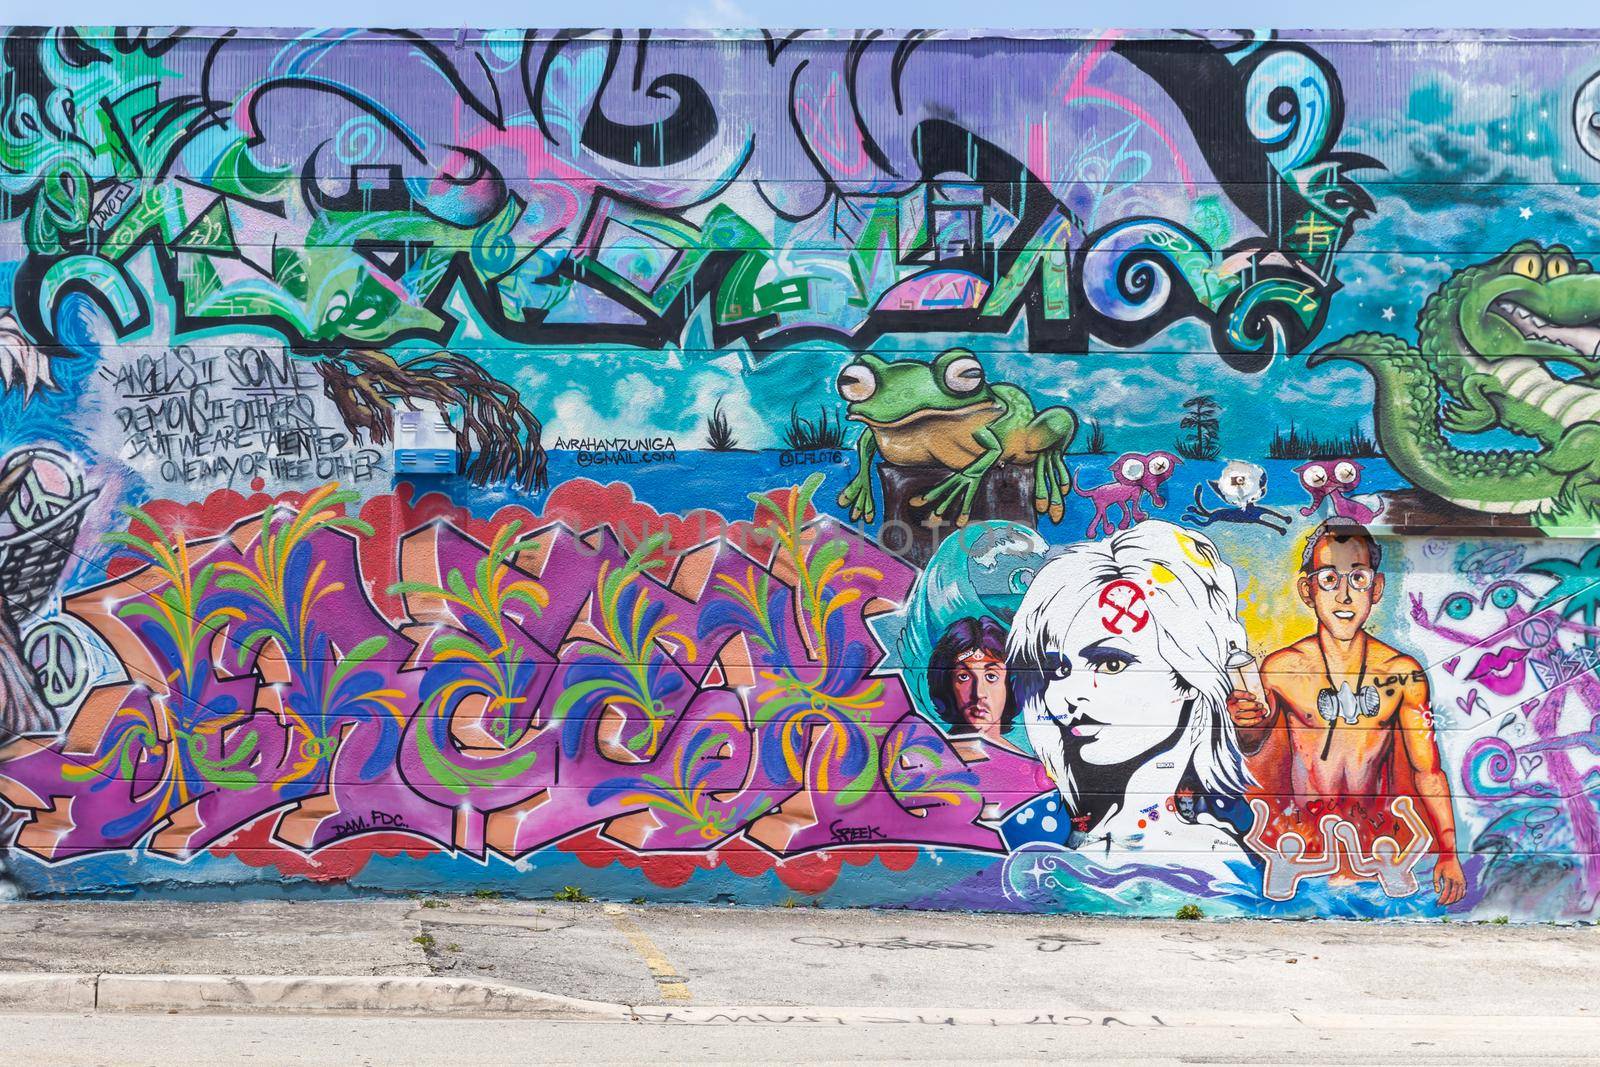 MIAMI, USA - AUGUST 29, 2014 : Graffiti on walls in graffiti district on August 29, 2014 in Miami. by Mariakray